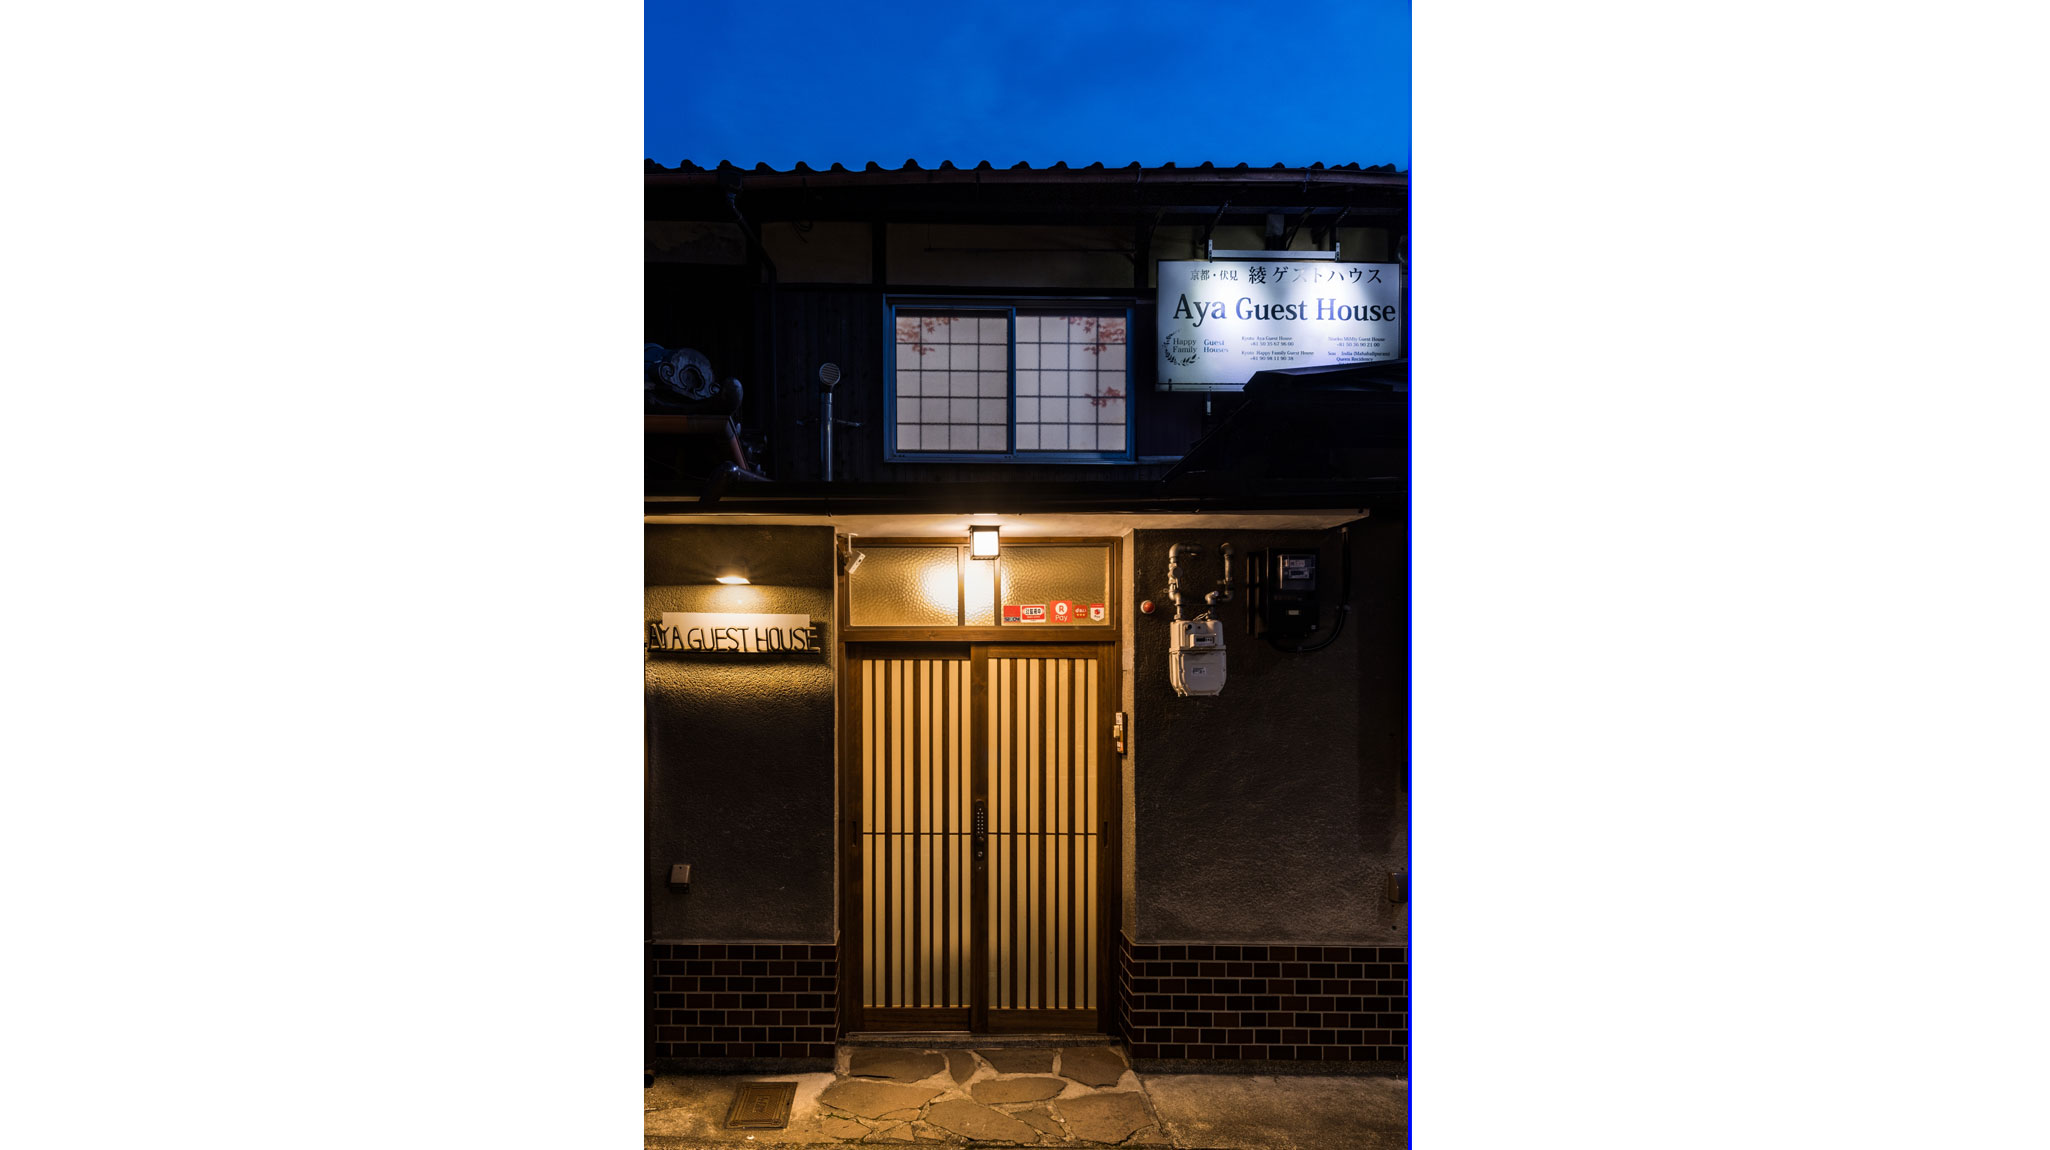 Kyoto Aya Guest House